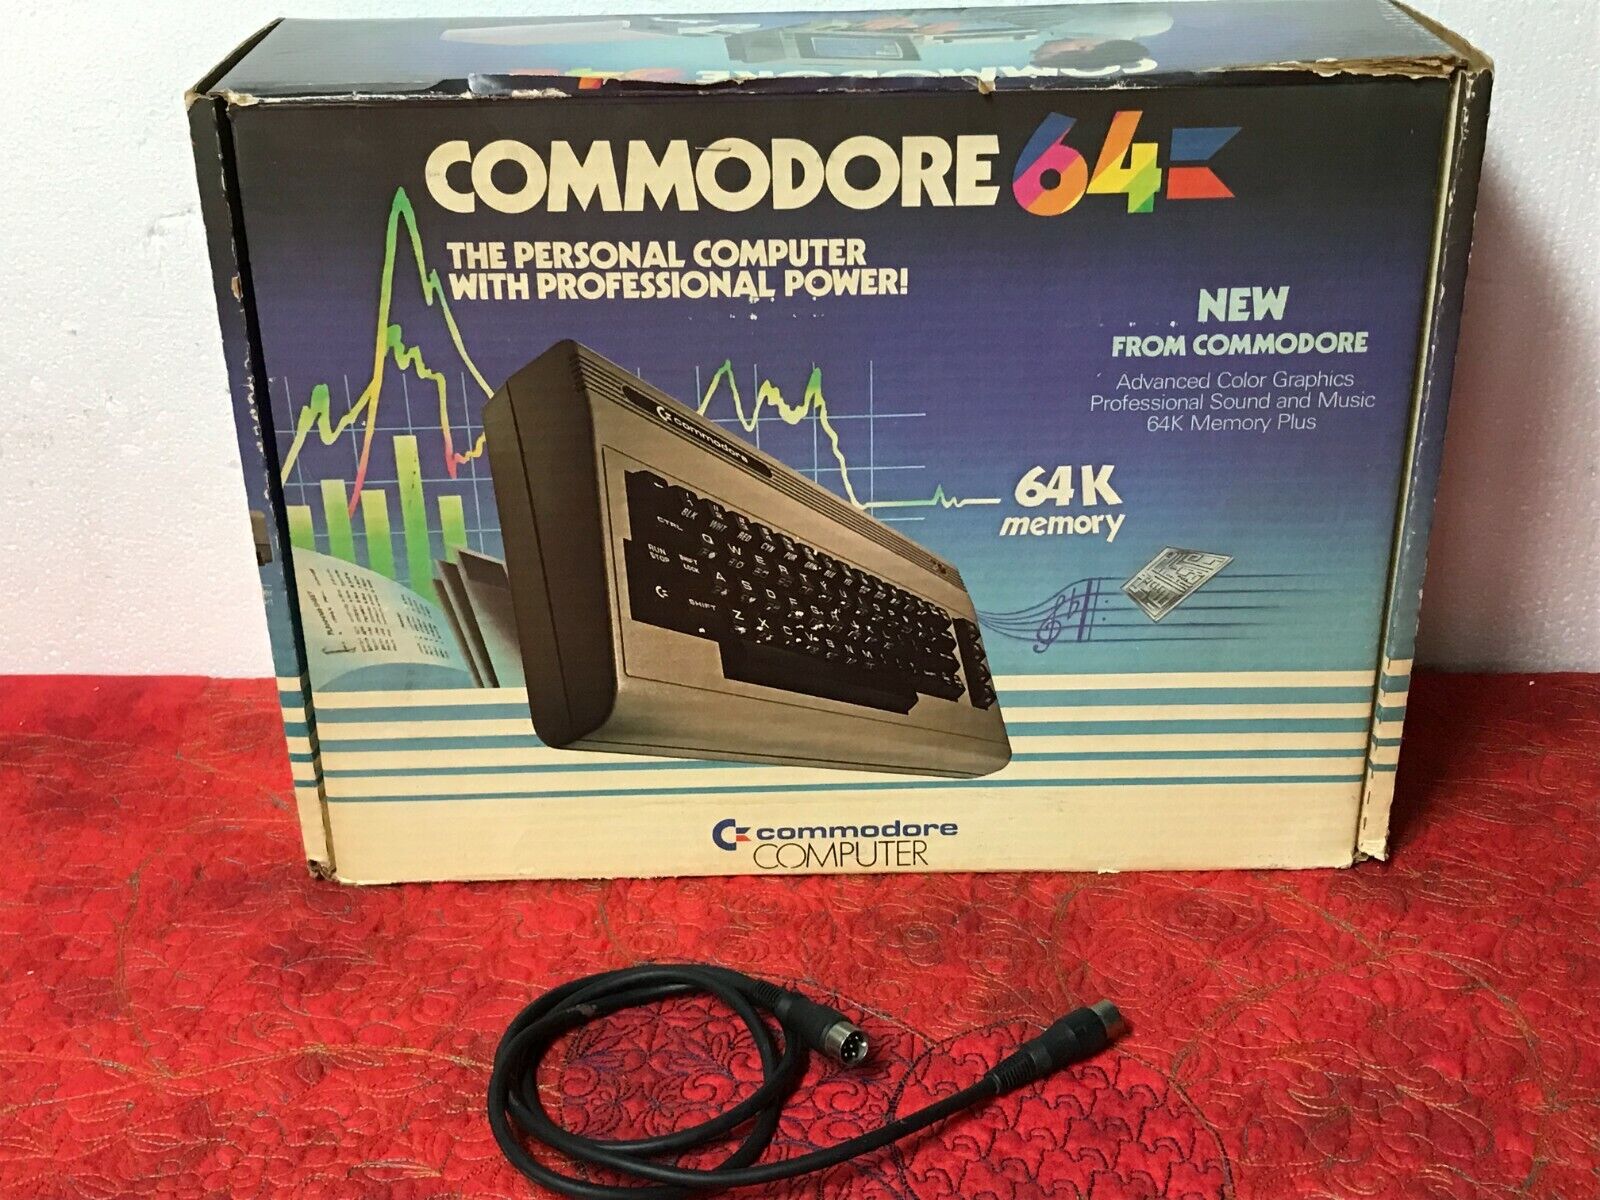 Commodore 64 and peripherals final sell off (up to $200.00 off shipping)